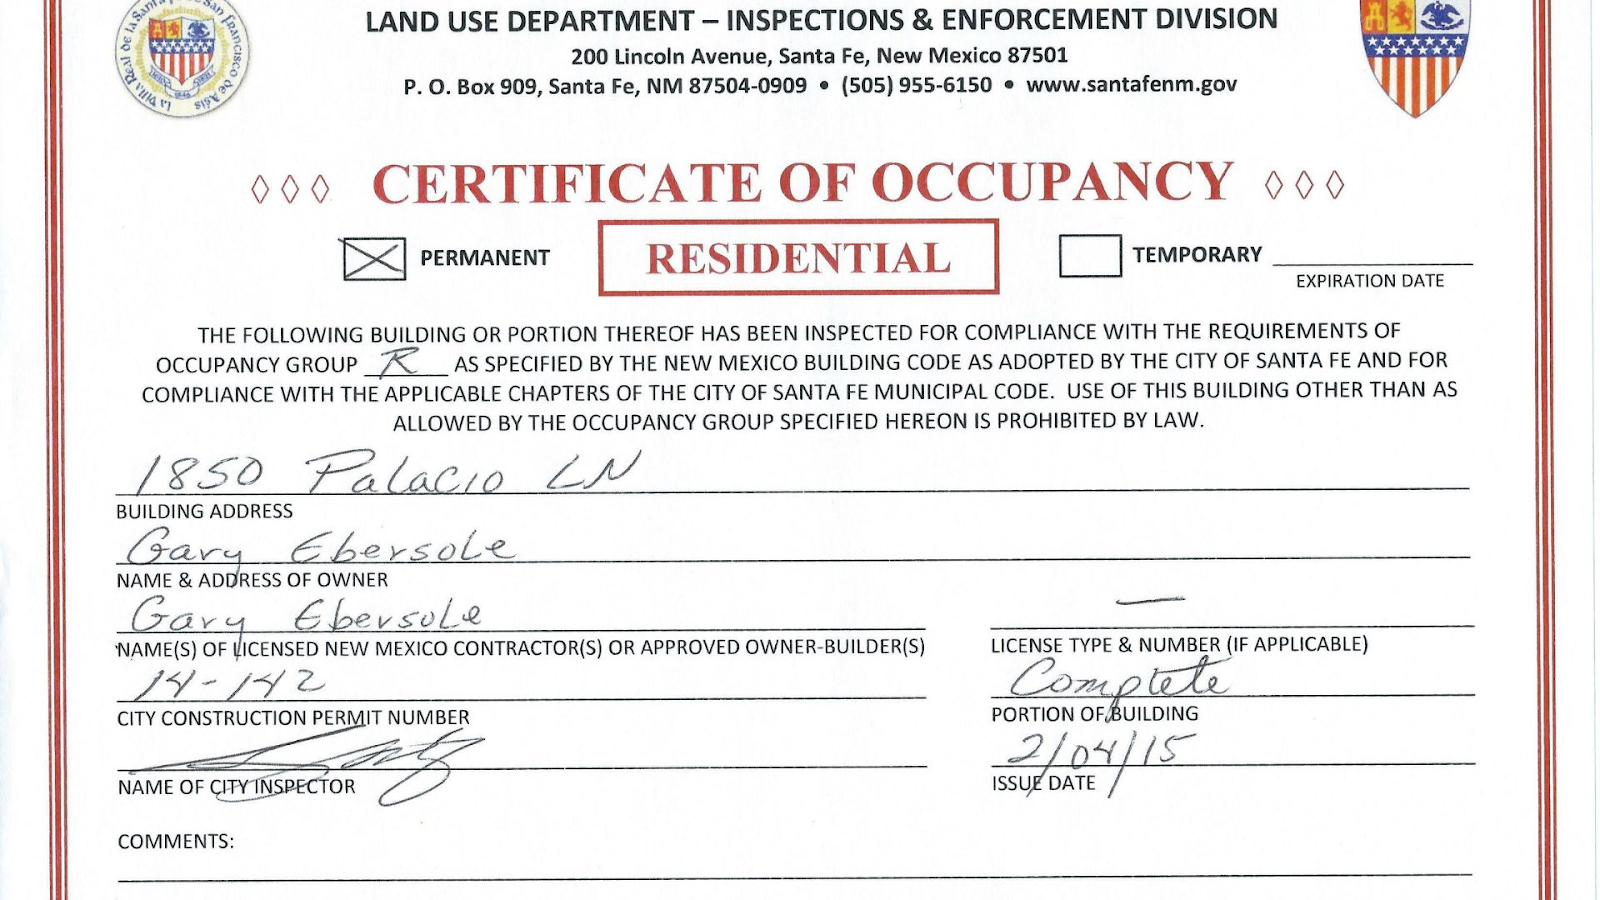 Occupancy Certificate of Residential Property.